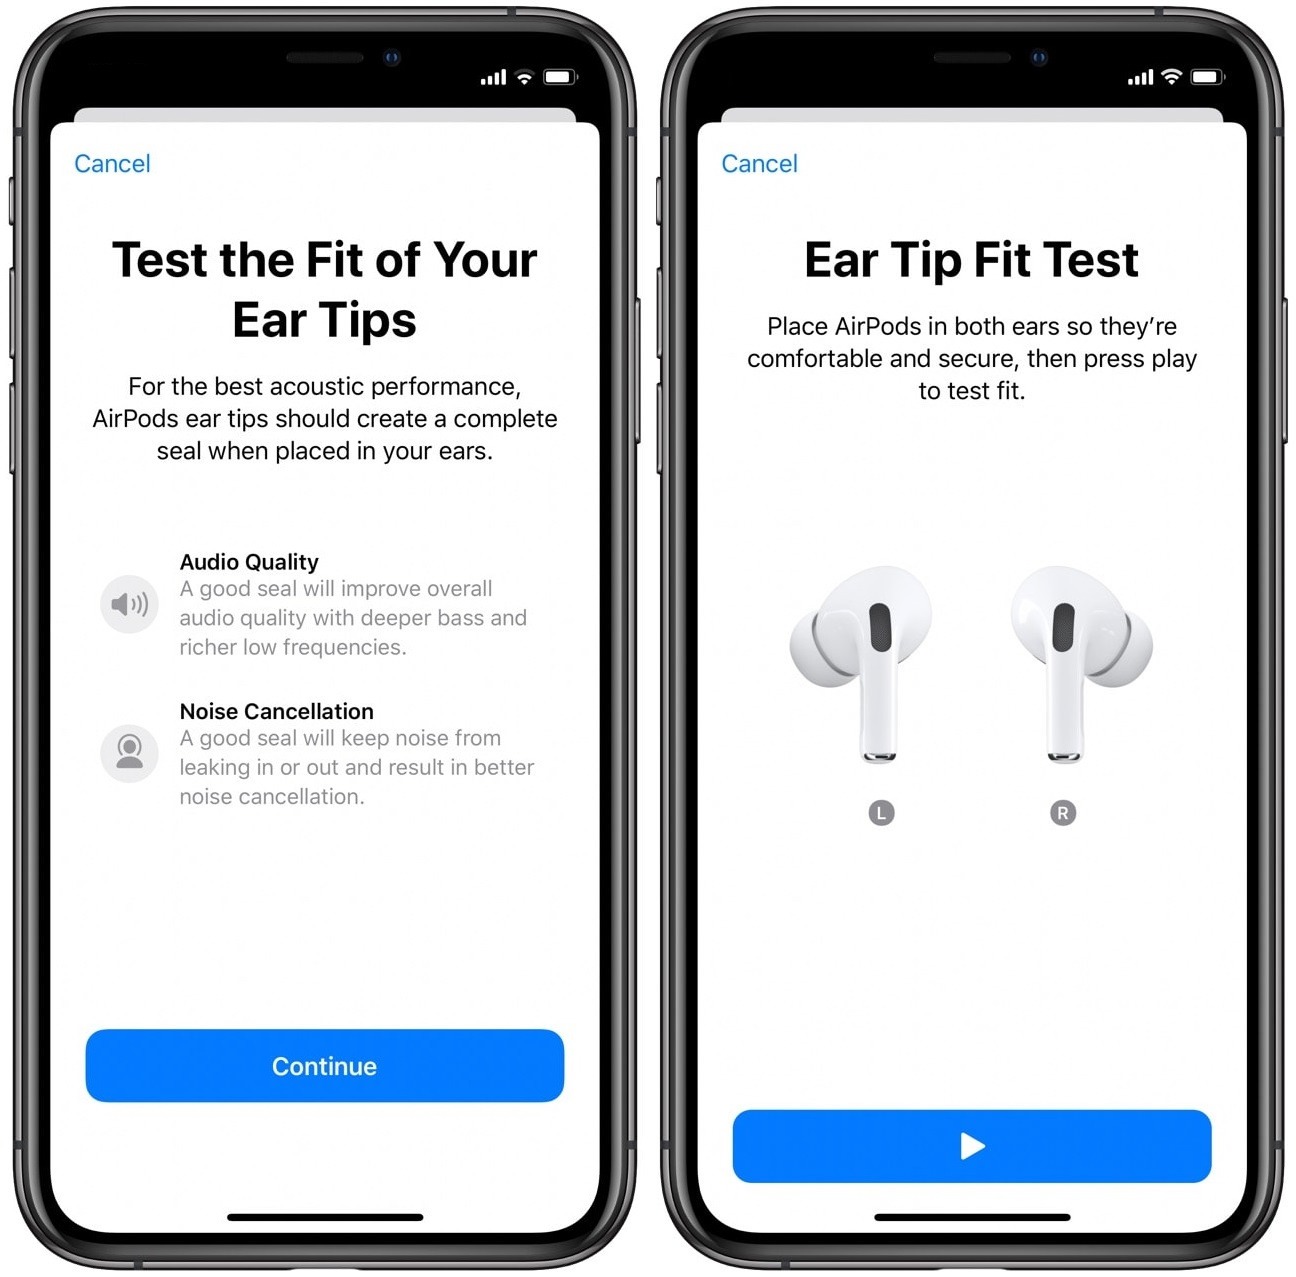 airpods pro ear tip fit test not working